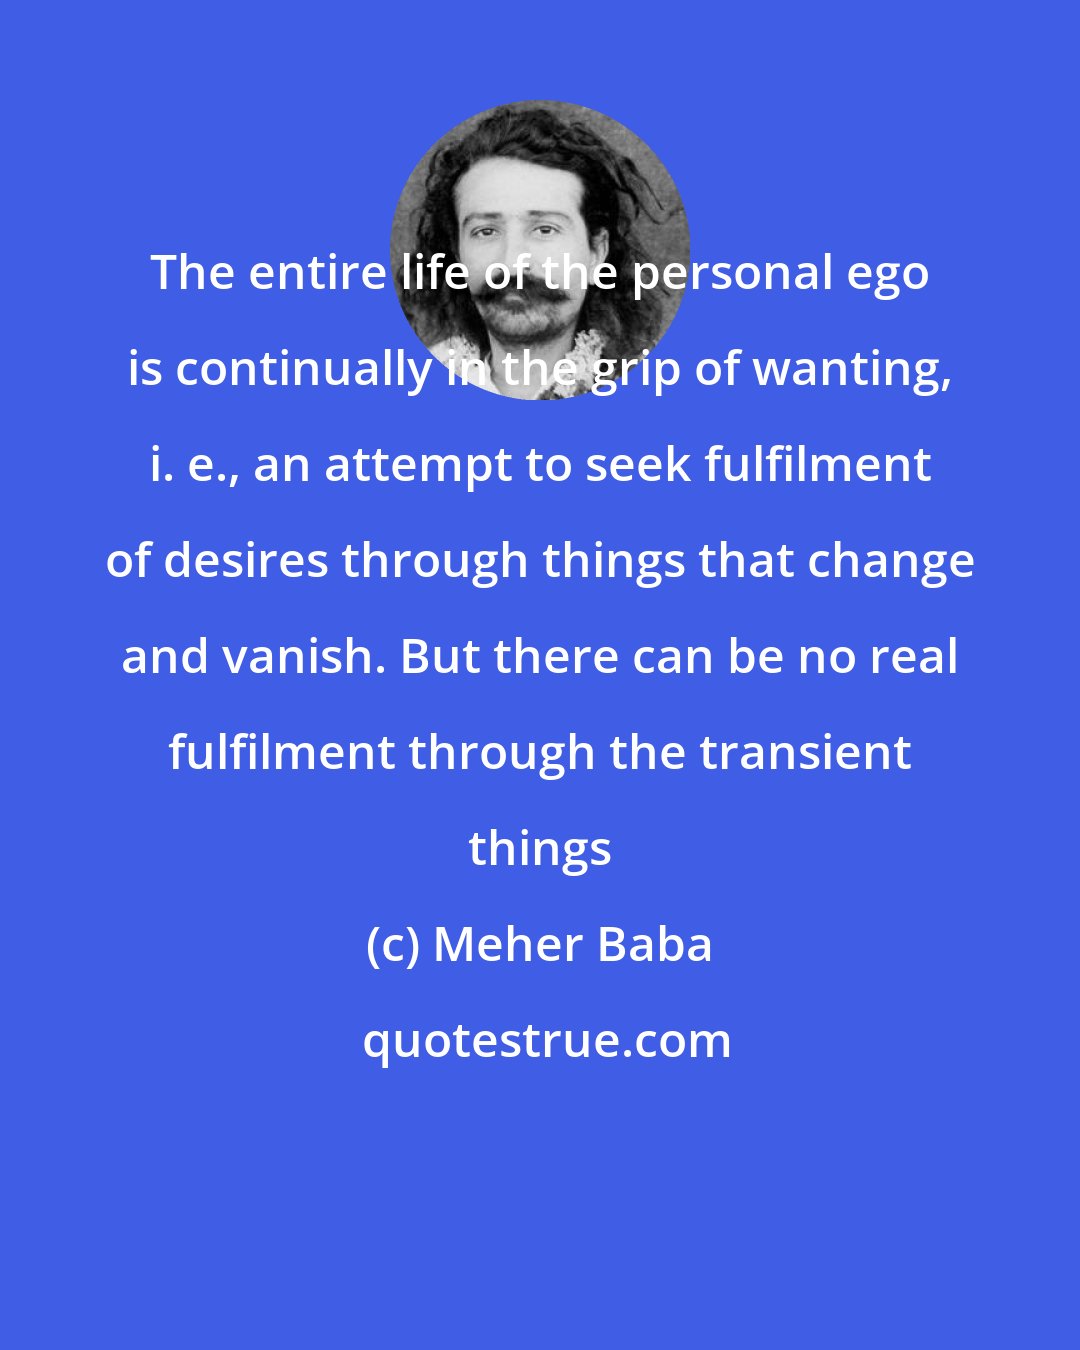 Meher Baba: The entire life of the personal ego is continually in the grip of wanting, i. e., an attempt to seek fulfilment of desires through things that change and vanish. But there can be no real fulfilment through the transient things